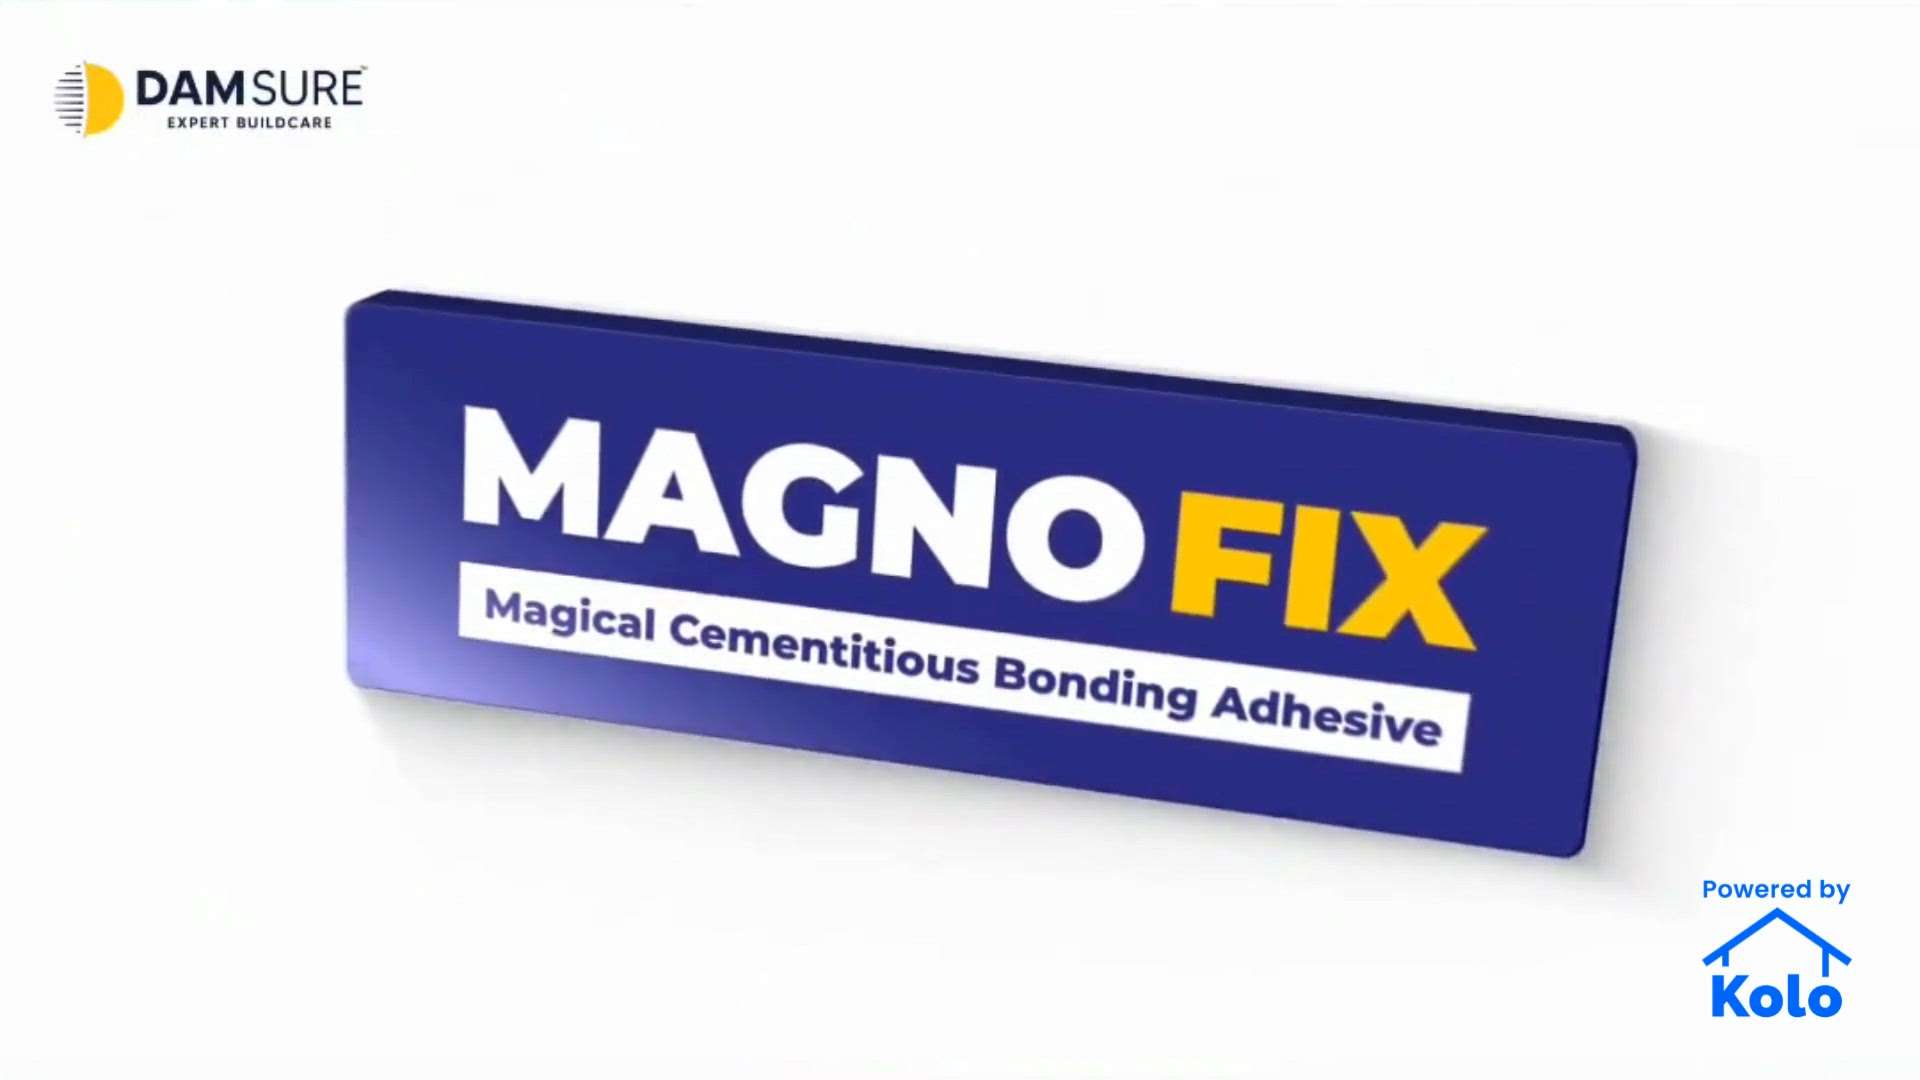 magnofix features
.
.
 #damsure #damsureproducts #damsurewaterproofing